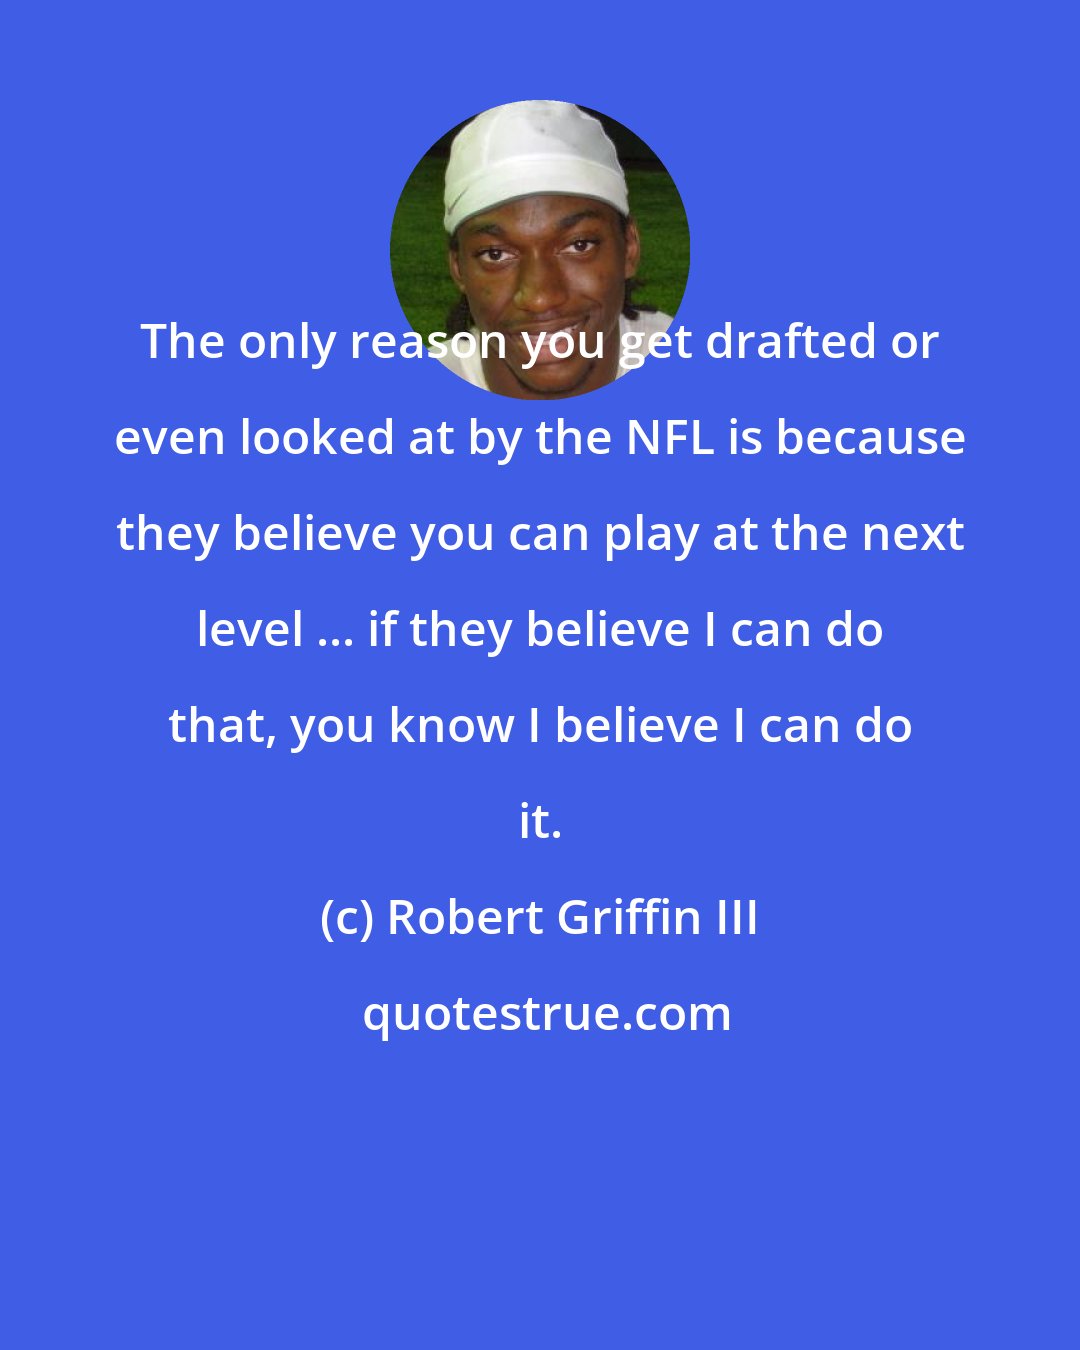 Robert Griffin III: The only reason you get drafted or even looked at by the NFL is because they believe you can play at the next level ... if they believe I can do that, you know I believe I can do it.